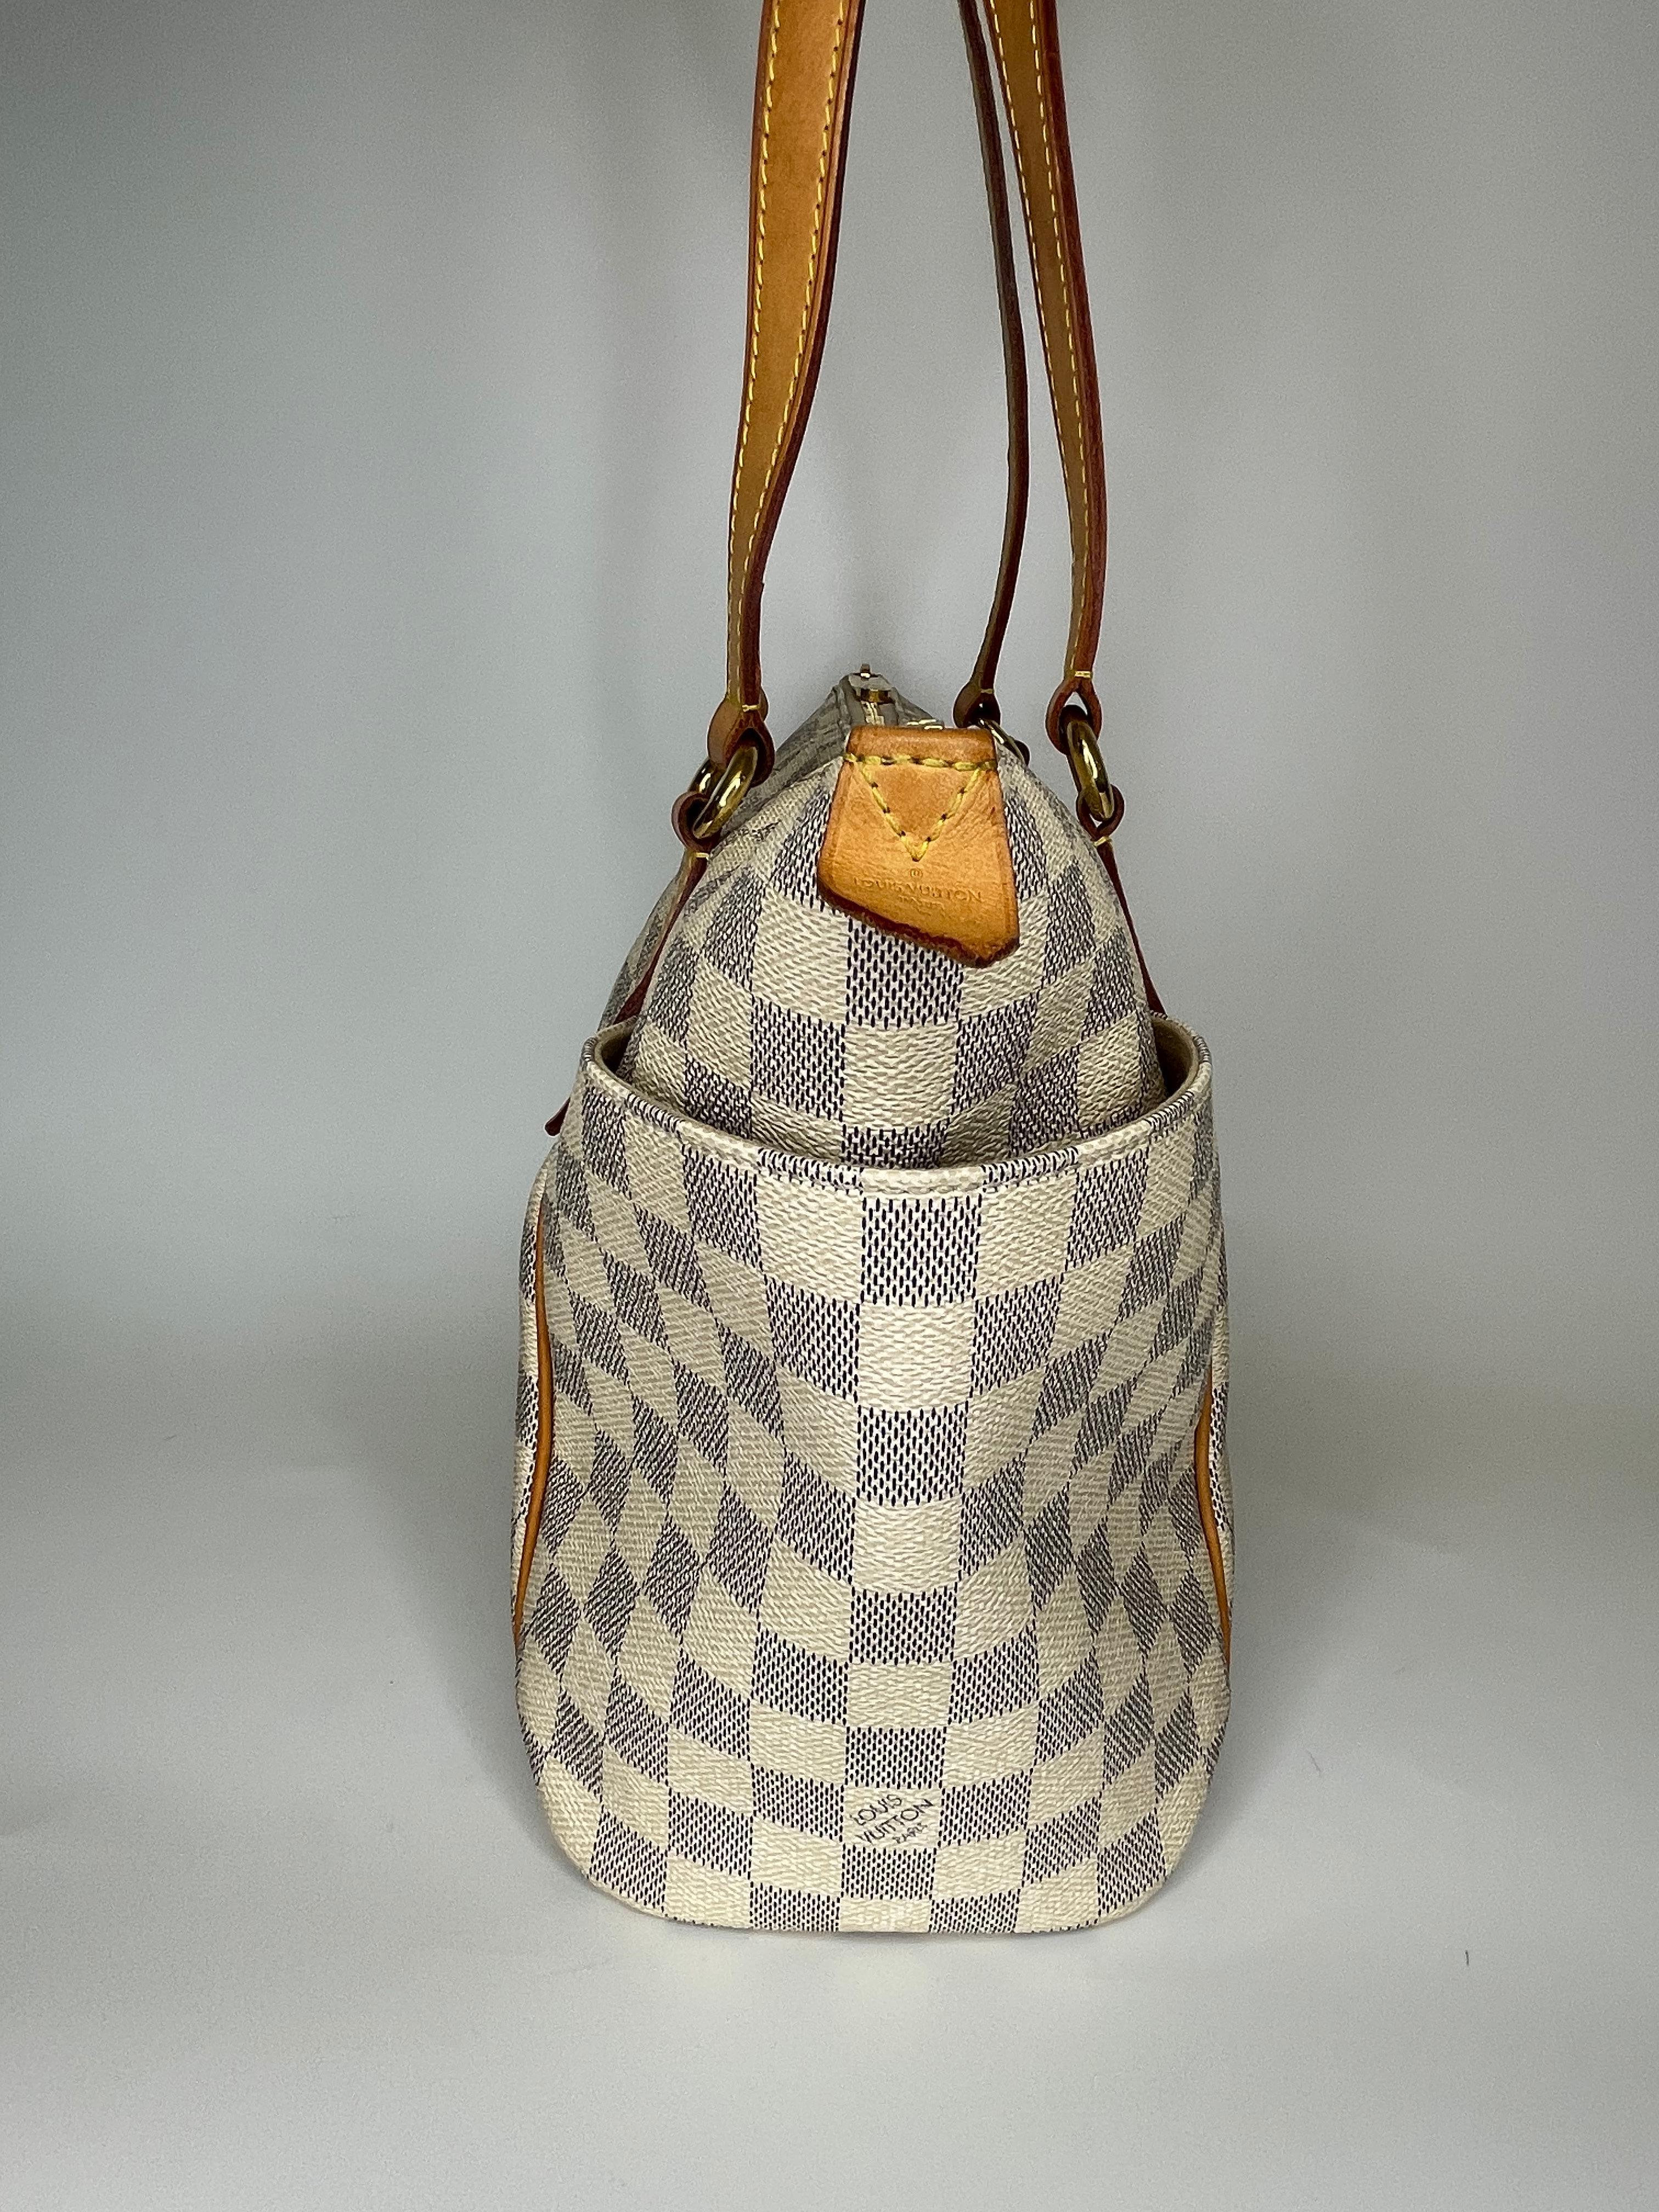 This style is called Totally and the bag is made with white coated canvas with Damier Azur pattern and features vachetta leather finishes, brass hardware, dual flat leather shoulder straps, exterior side pockets and fabric interior lining. (Damier